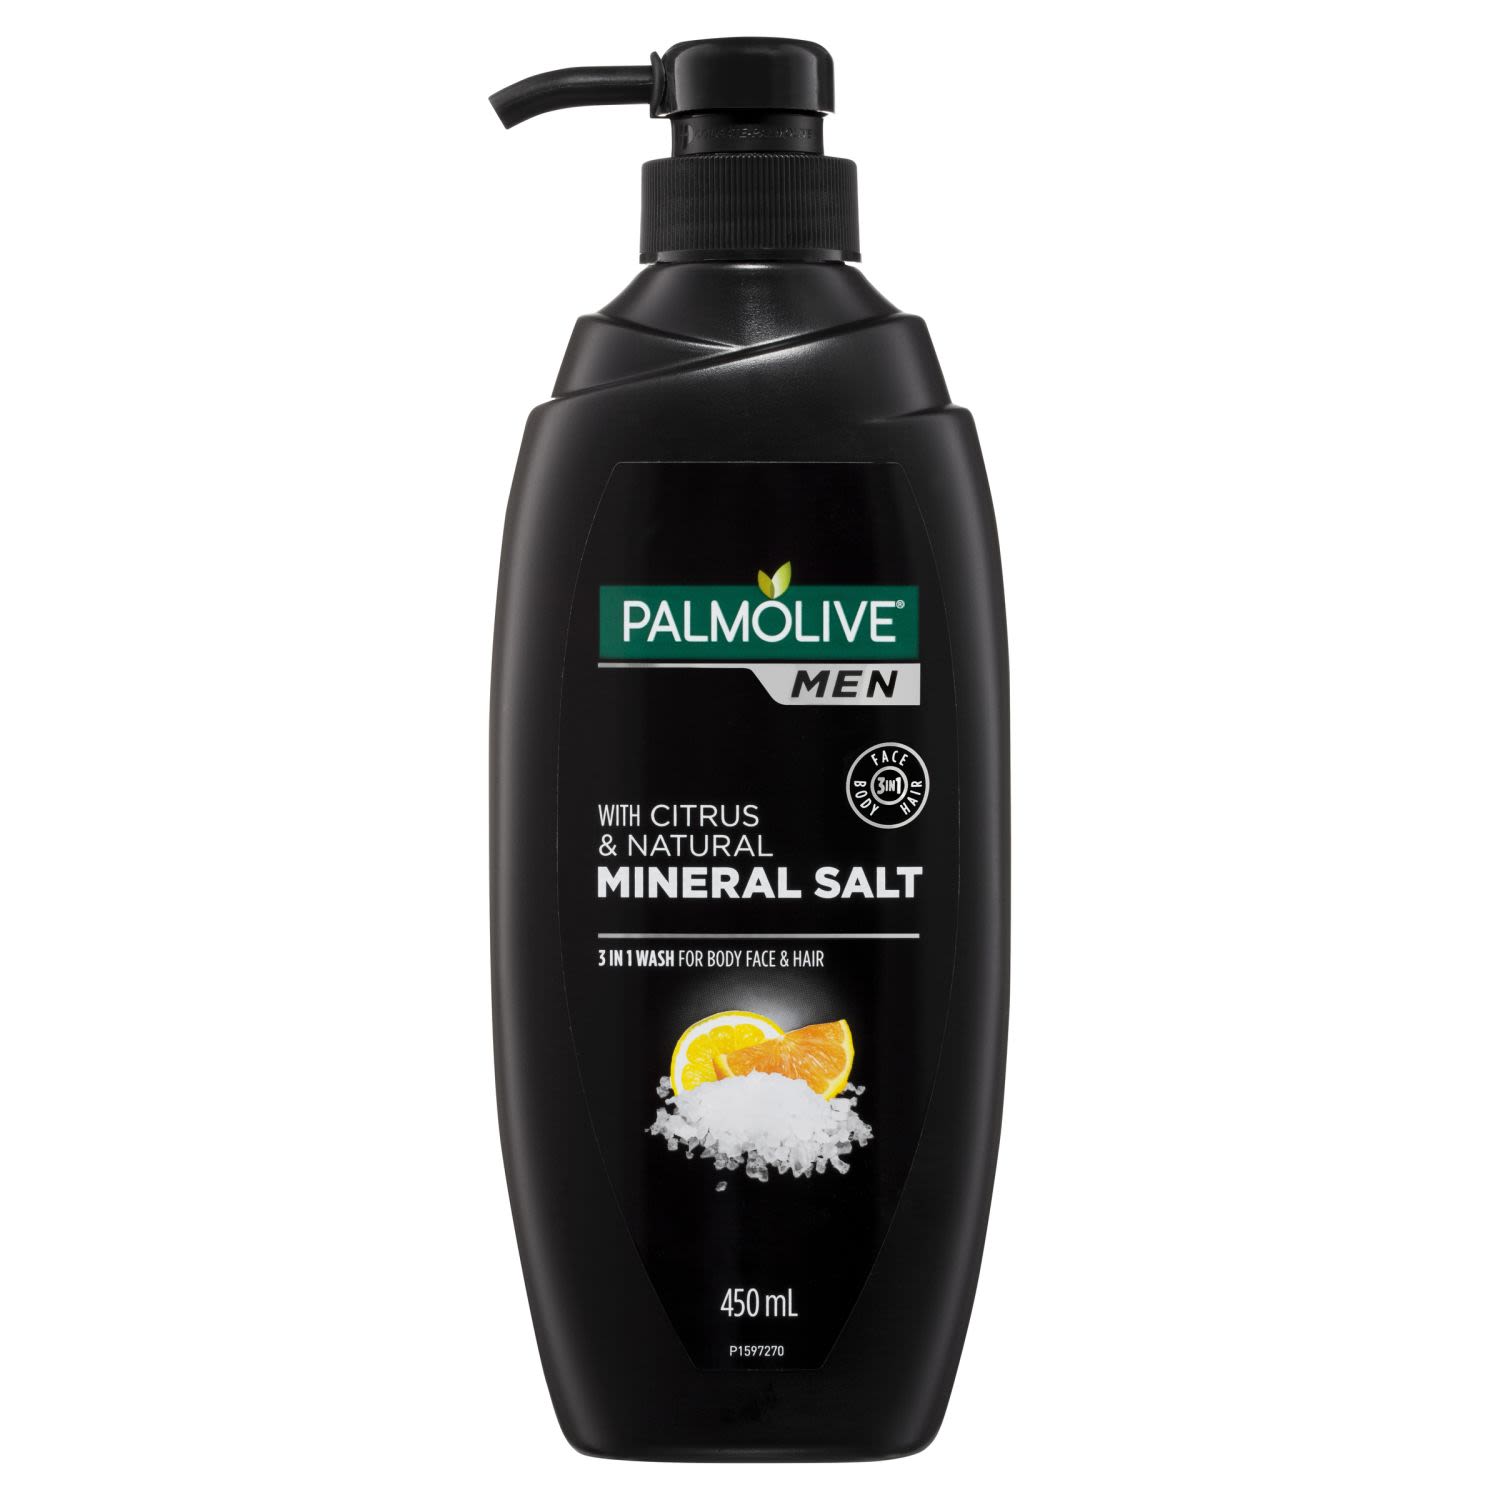 Palmolive Men 3 in 1 Wash For Body Face and Hair With Citrus & Natural Mineral Salt, 450 Millilitre